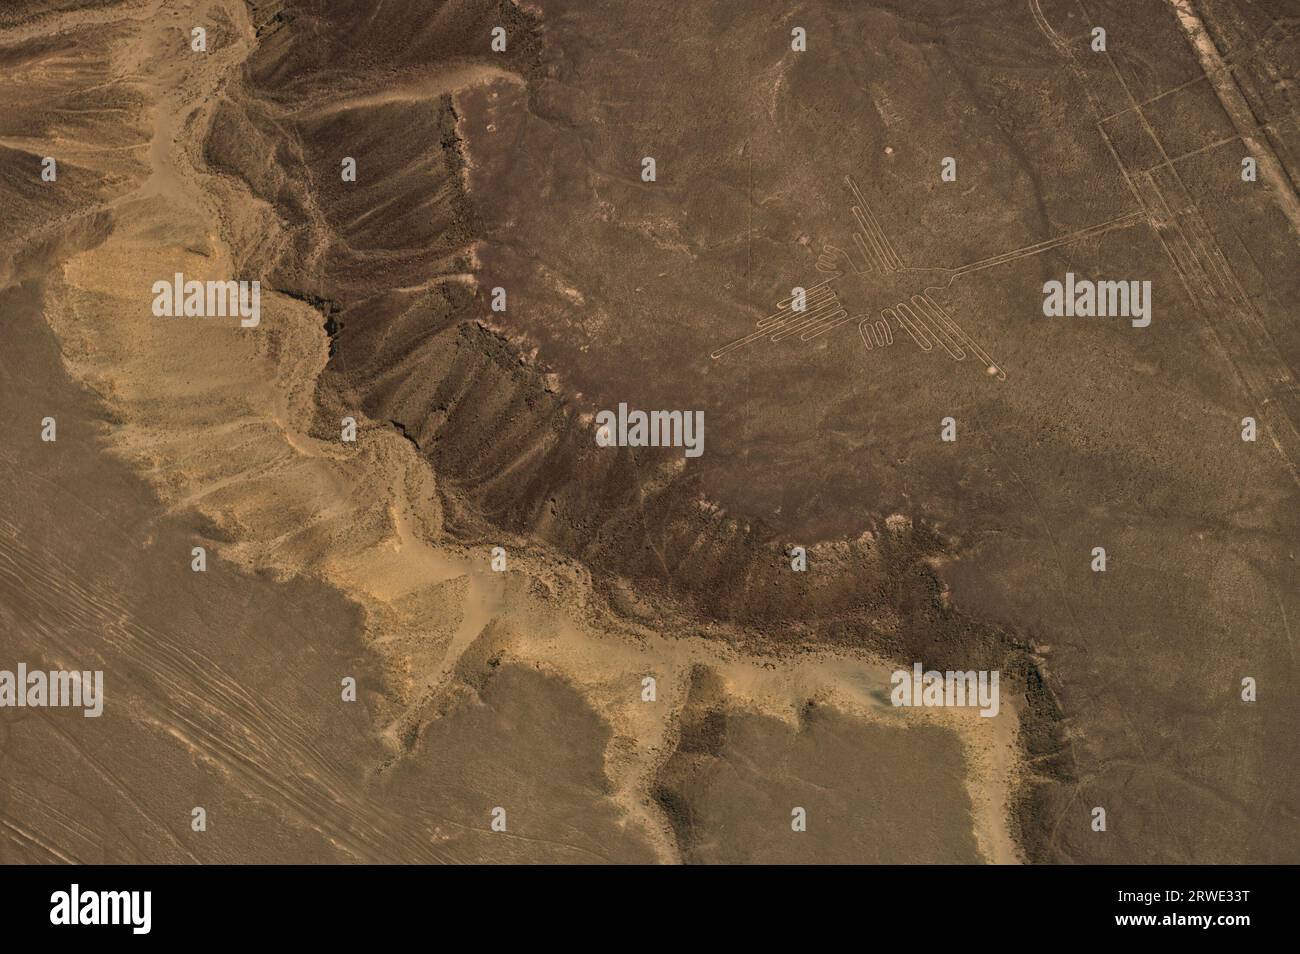 Aerial View of The Hummingbird Geoglyph at the Nazca Lines in Peru Stock Photo